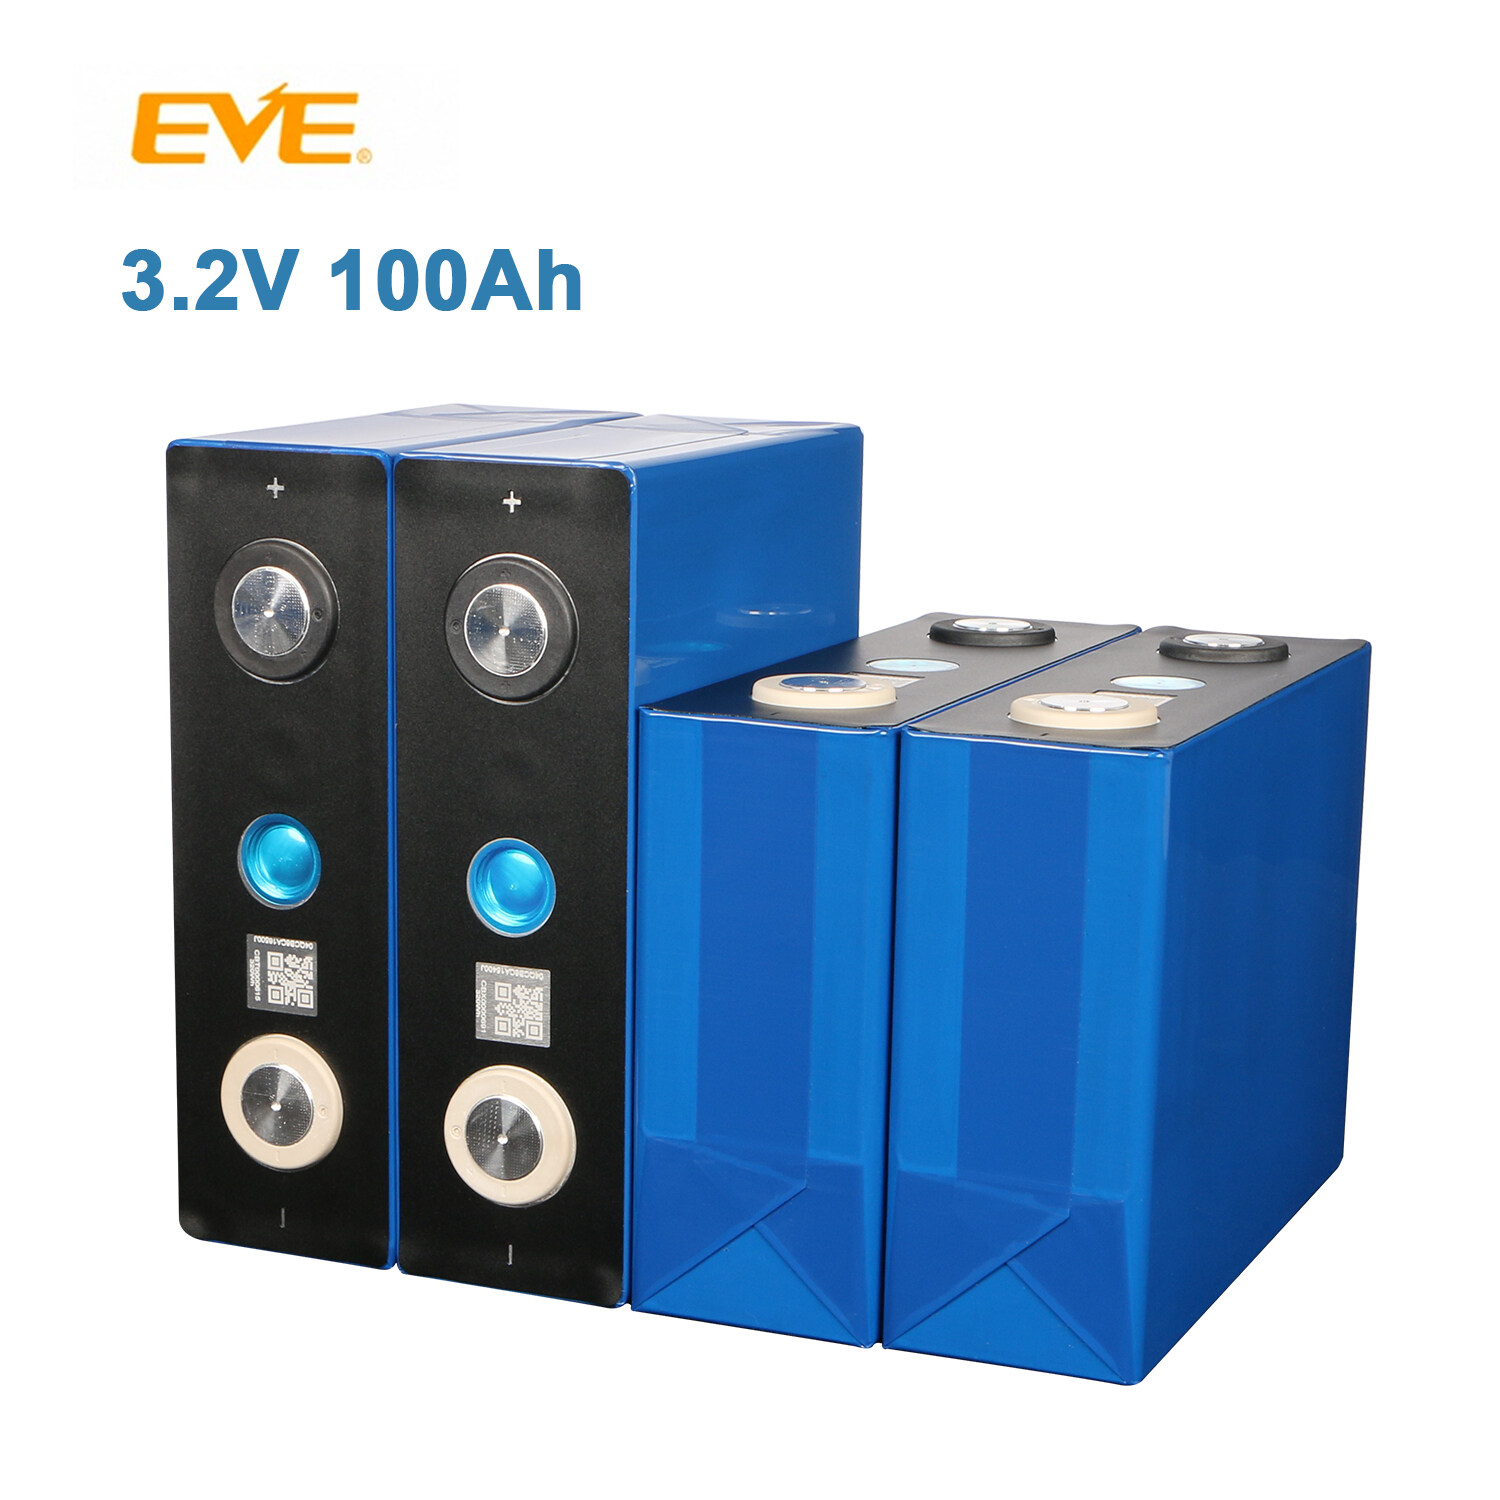 EVE 3.2V 100Ah Rechargeable LiFePO4 Battery Cell High Grade A